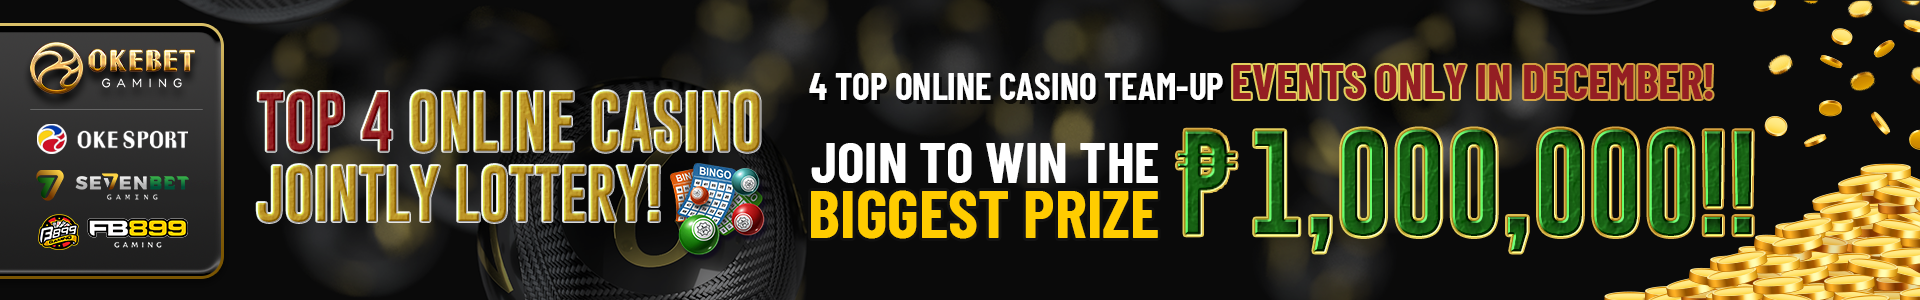 7BET - top 4 online casino jointly lottery